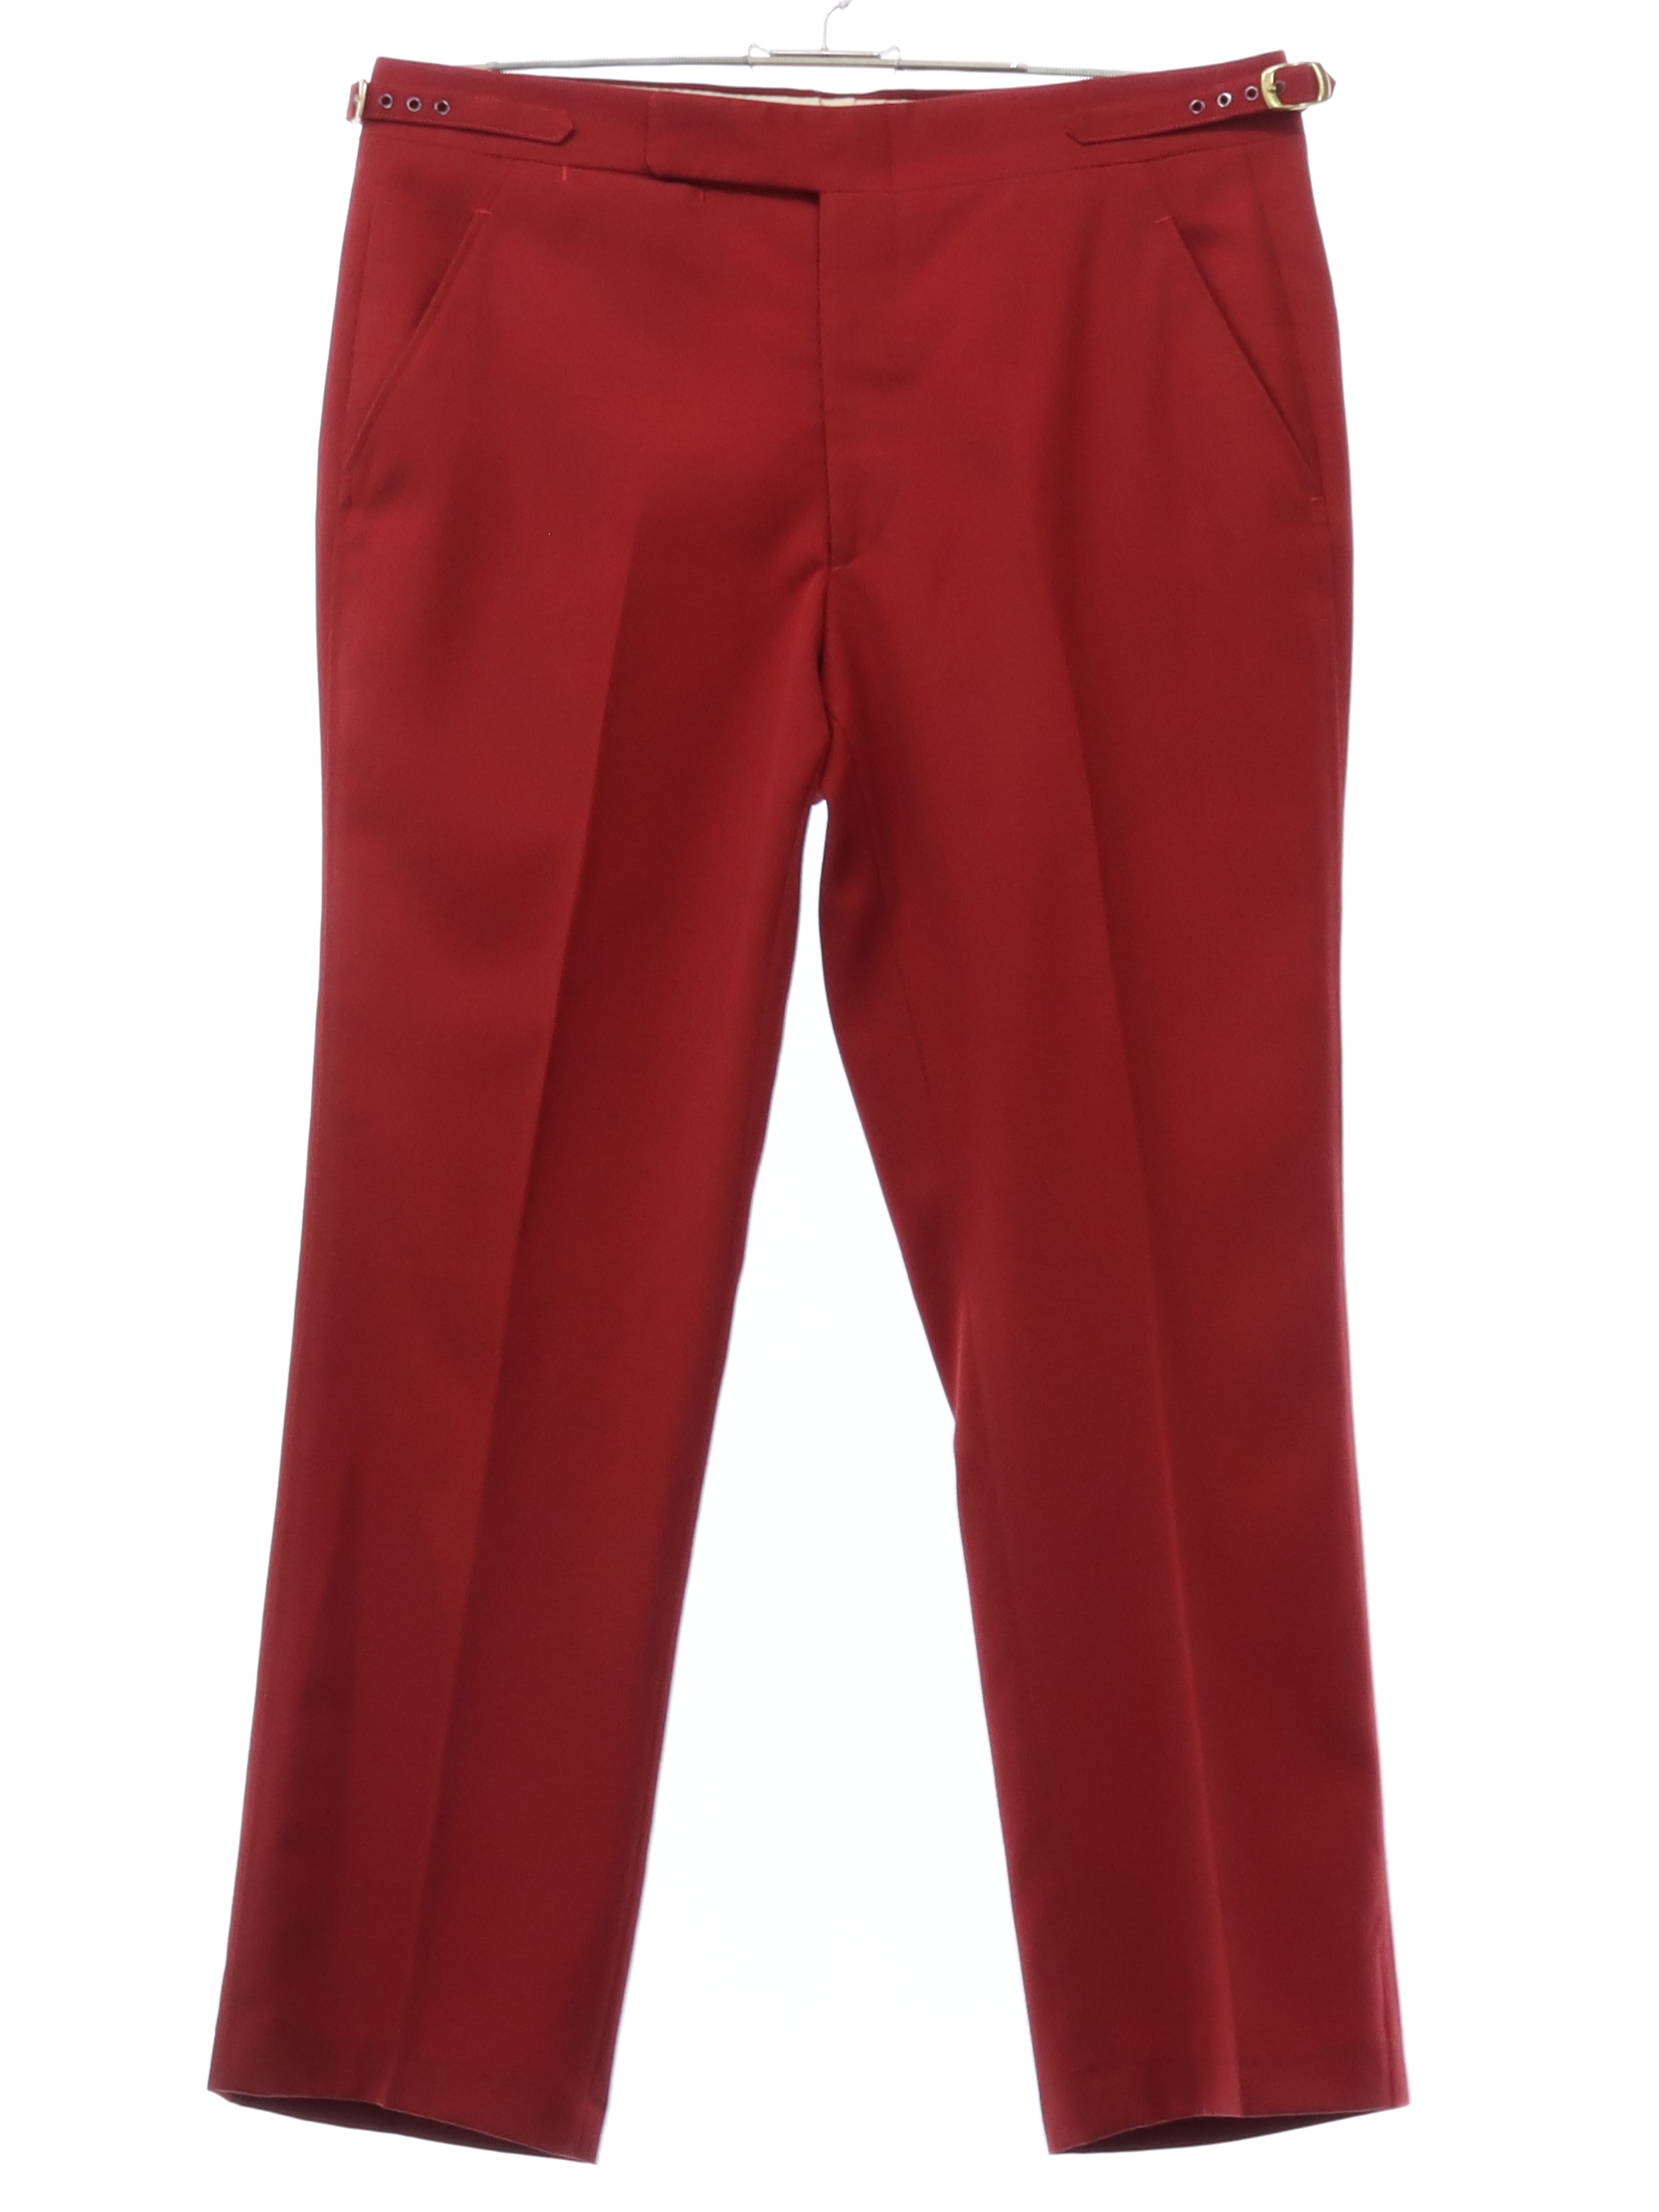 Wear Resistant Comfortable And Casual Look Plain Slim Fit Mens Red Formal  Trousers at Best Price in New Delhi | Welcome Garments